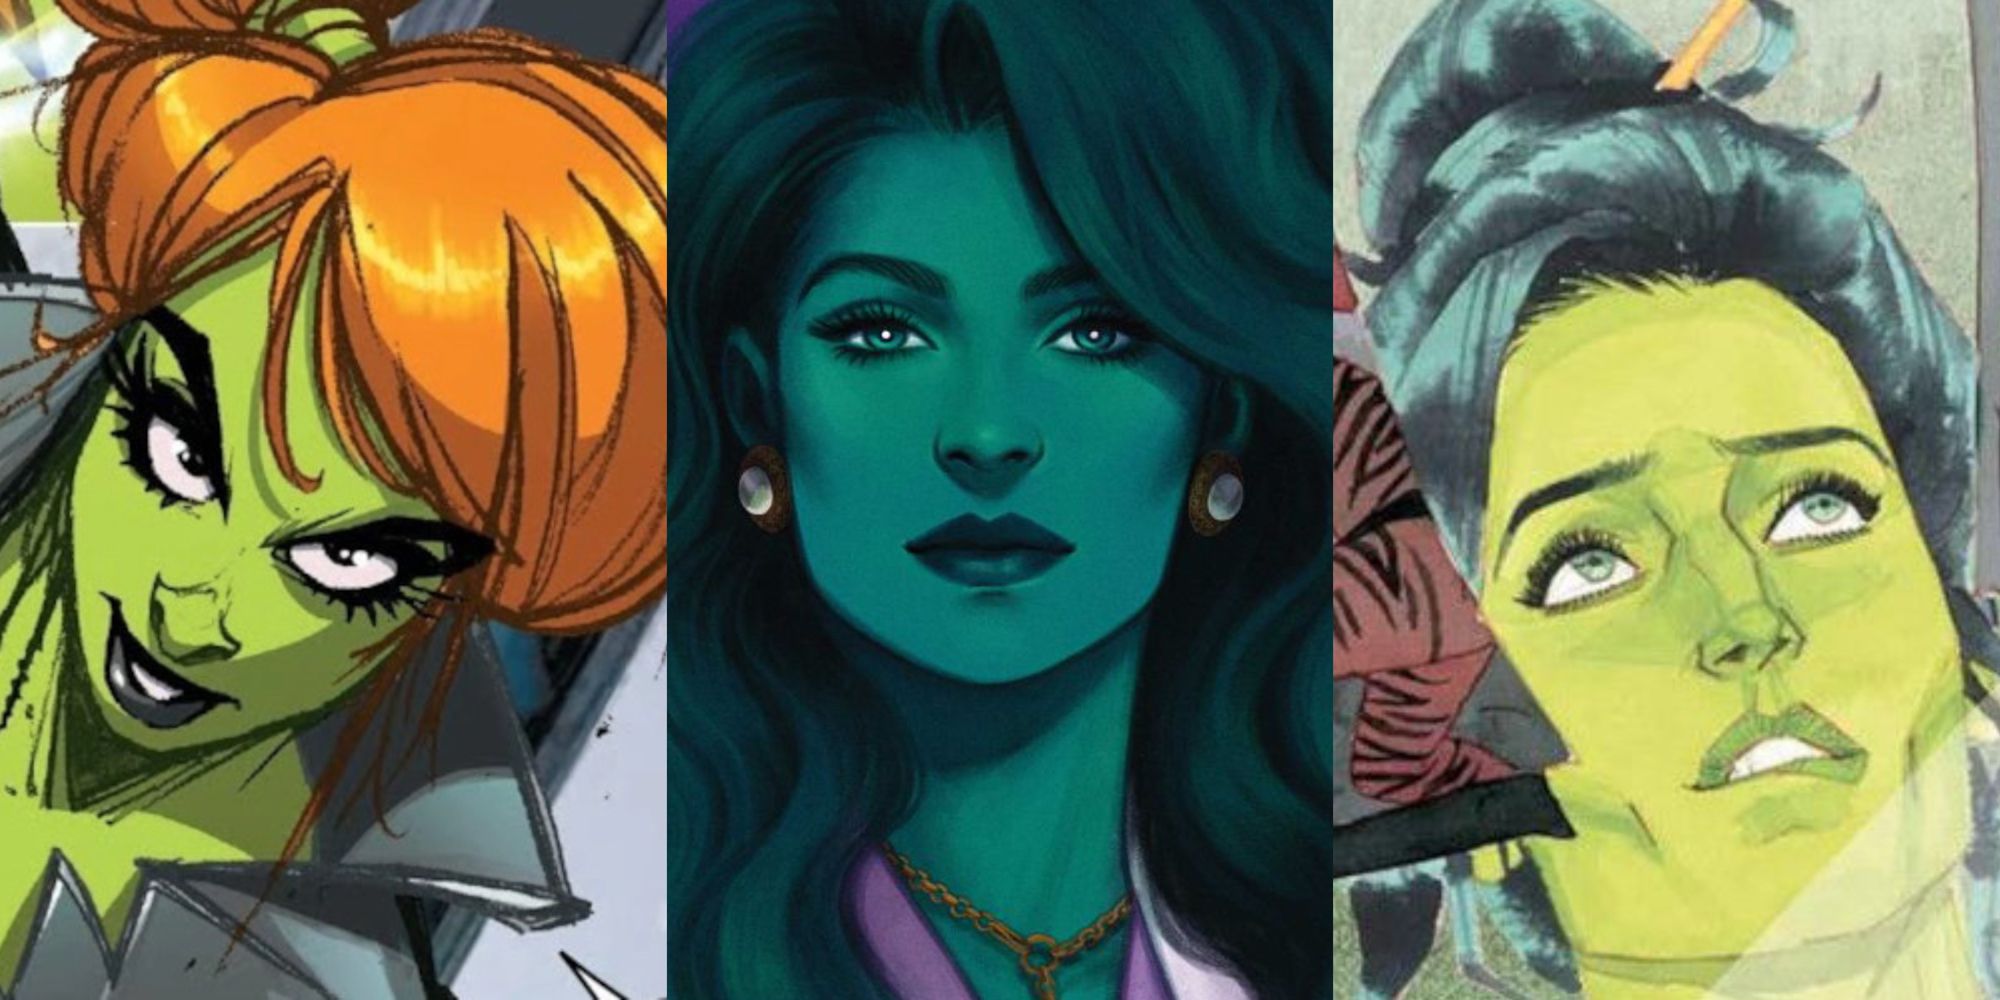 Split image featuring three different she-hulk iterations from the comics